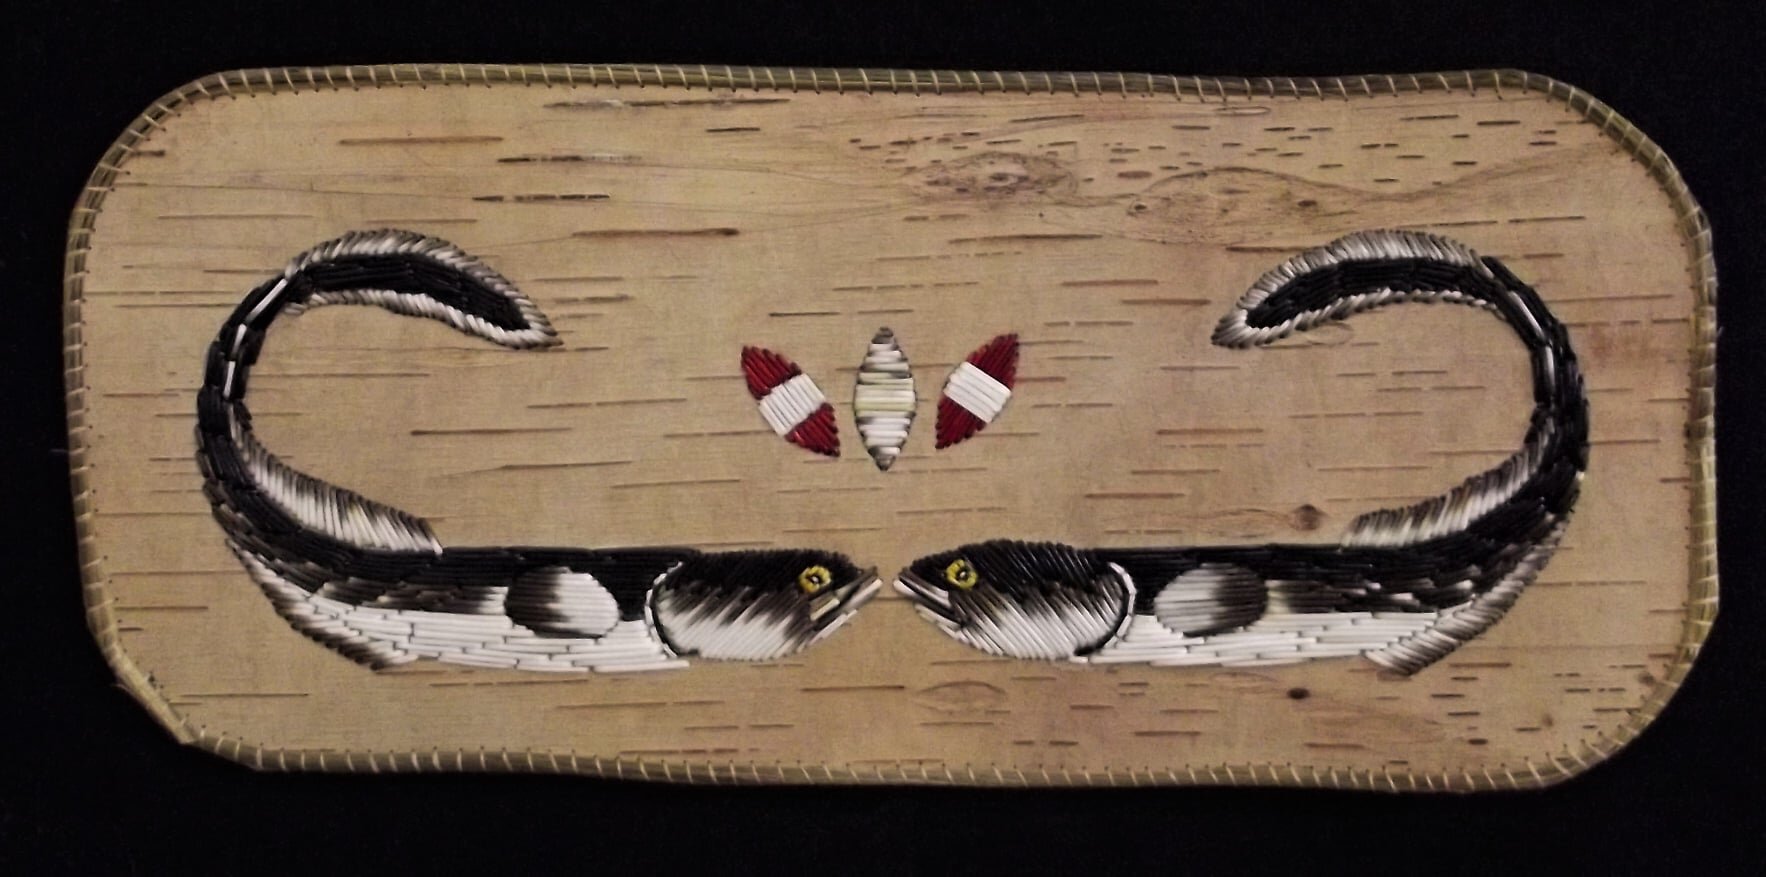 $2000.00, The Marshall Decision (Two Eals), Dyed Porcupine Quills Birch Bark, 10” x 22”